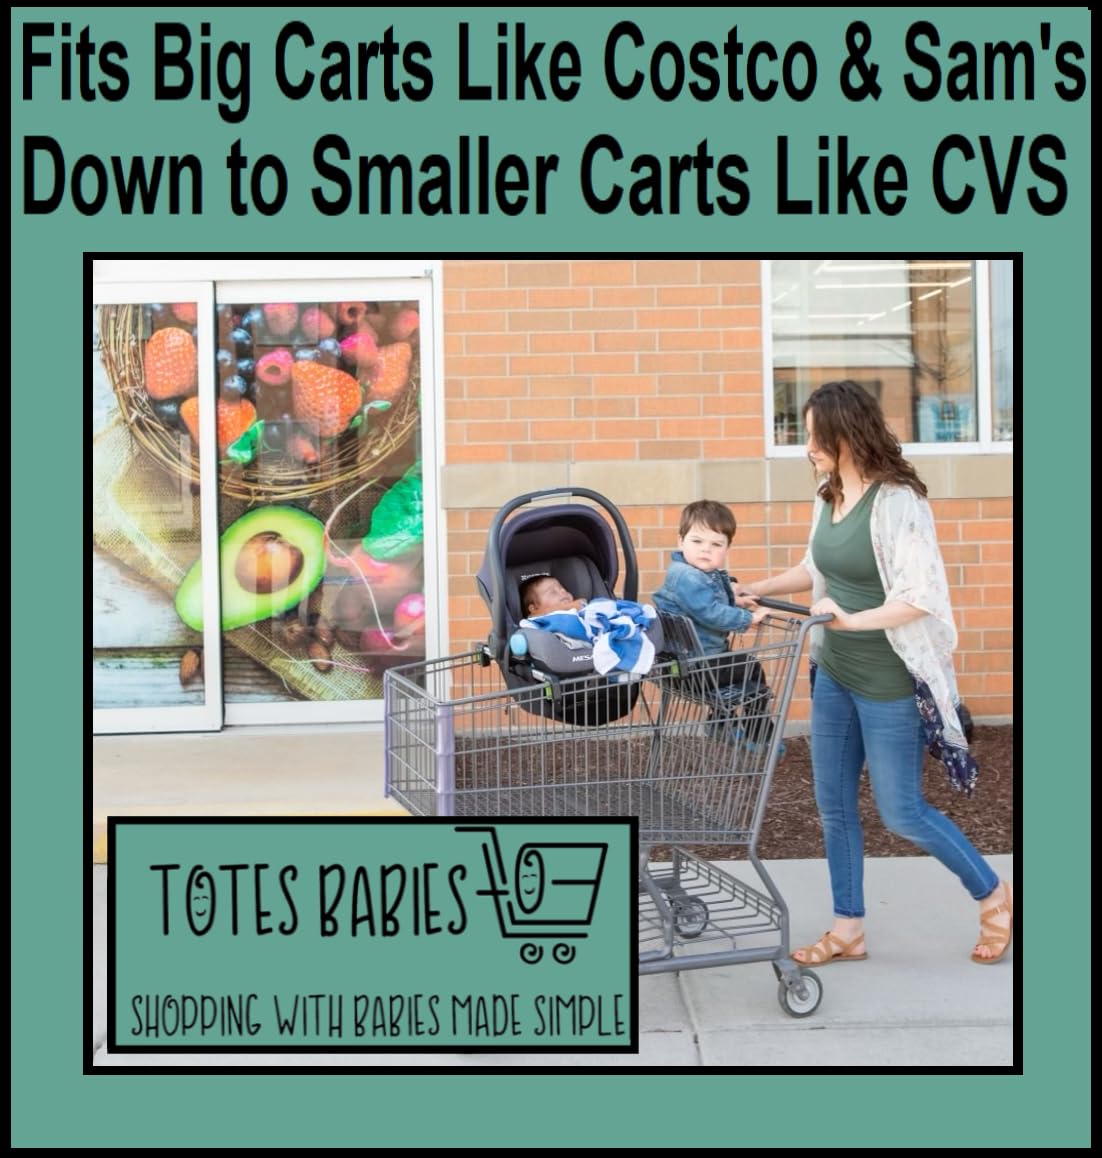 Totes Babies - Car Seat Carrier for Shopping Carts, Allows Babies, Newborns, Infants and Toddlers to Stay Snug or Sleeping in Car Seat While Parents Shop, As Seen on Shark Tank - Totes Babies Car Seat Carrier Review